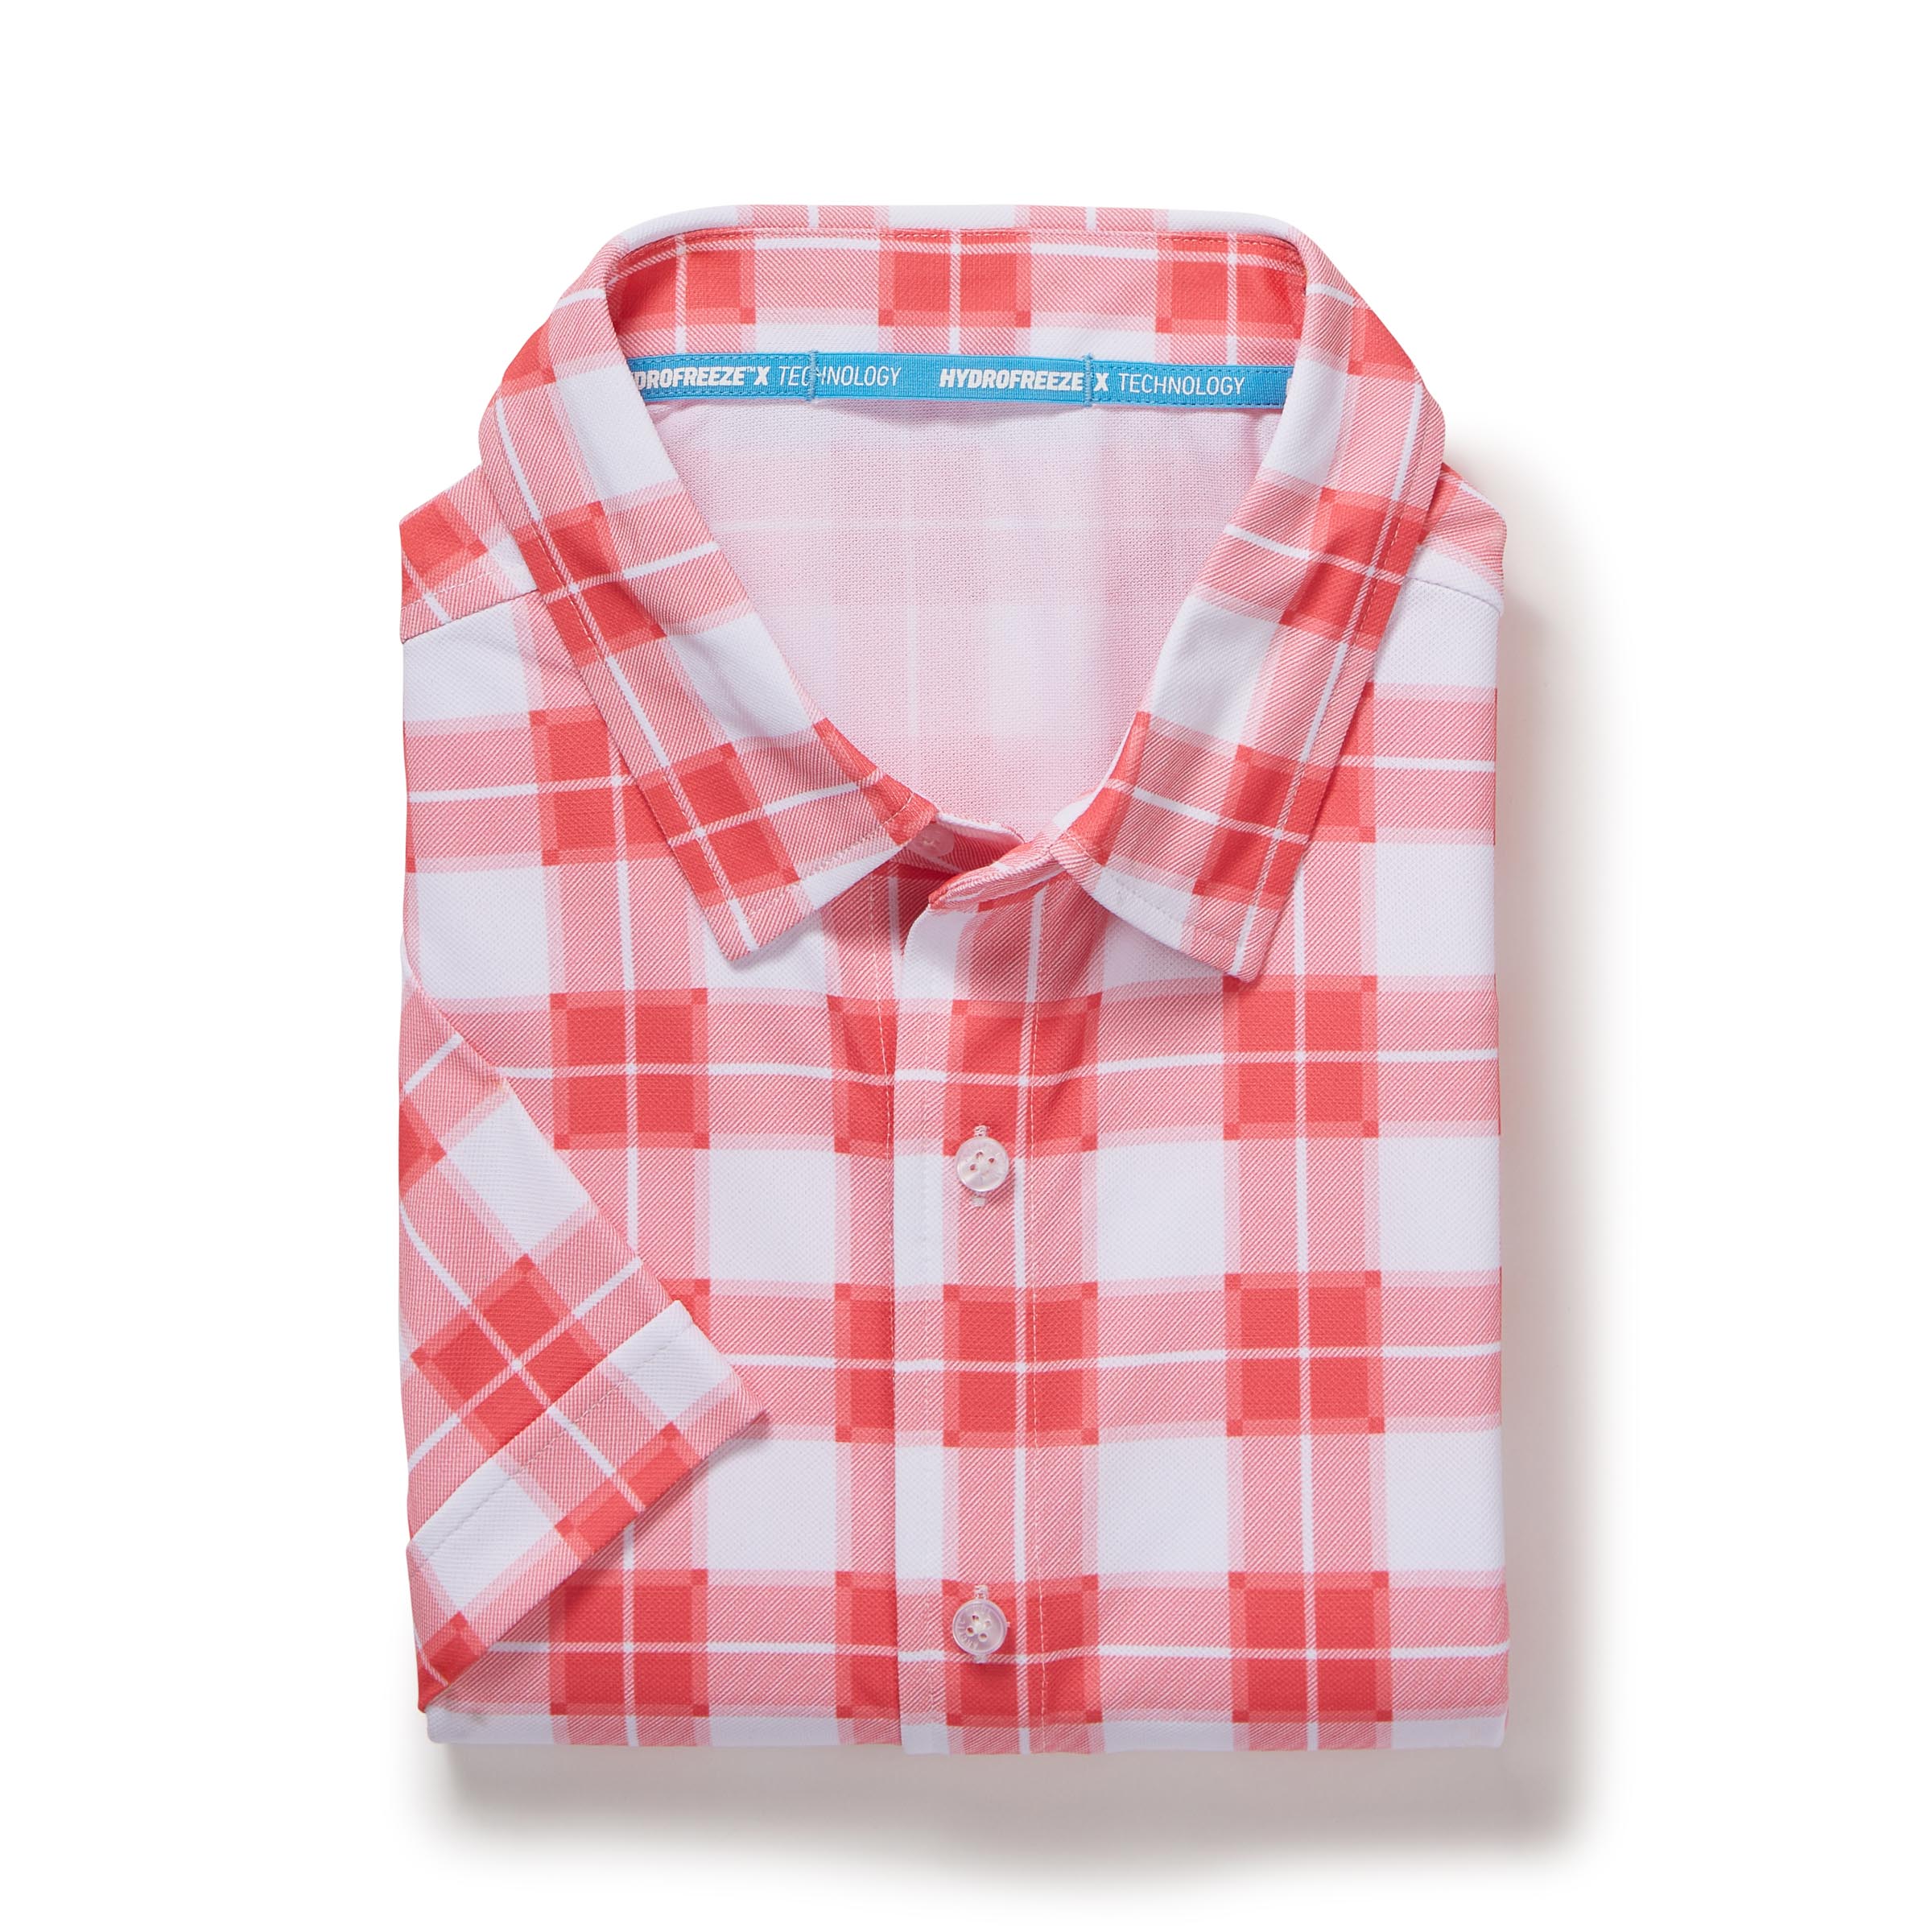 NEW MagnaReady x Arctic Cooling Pique Polo Short Sleeves in Red Gingham